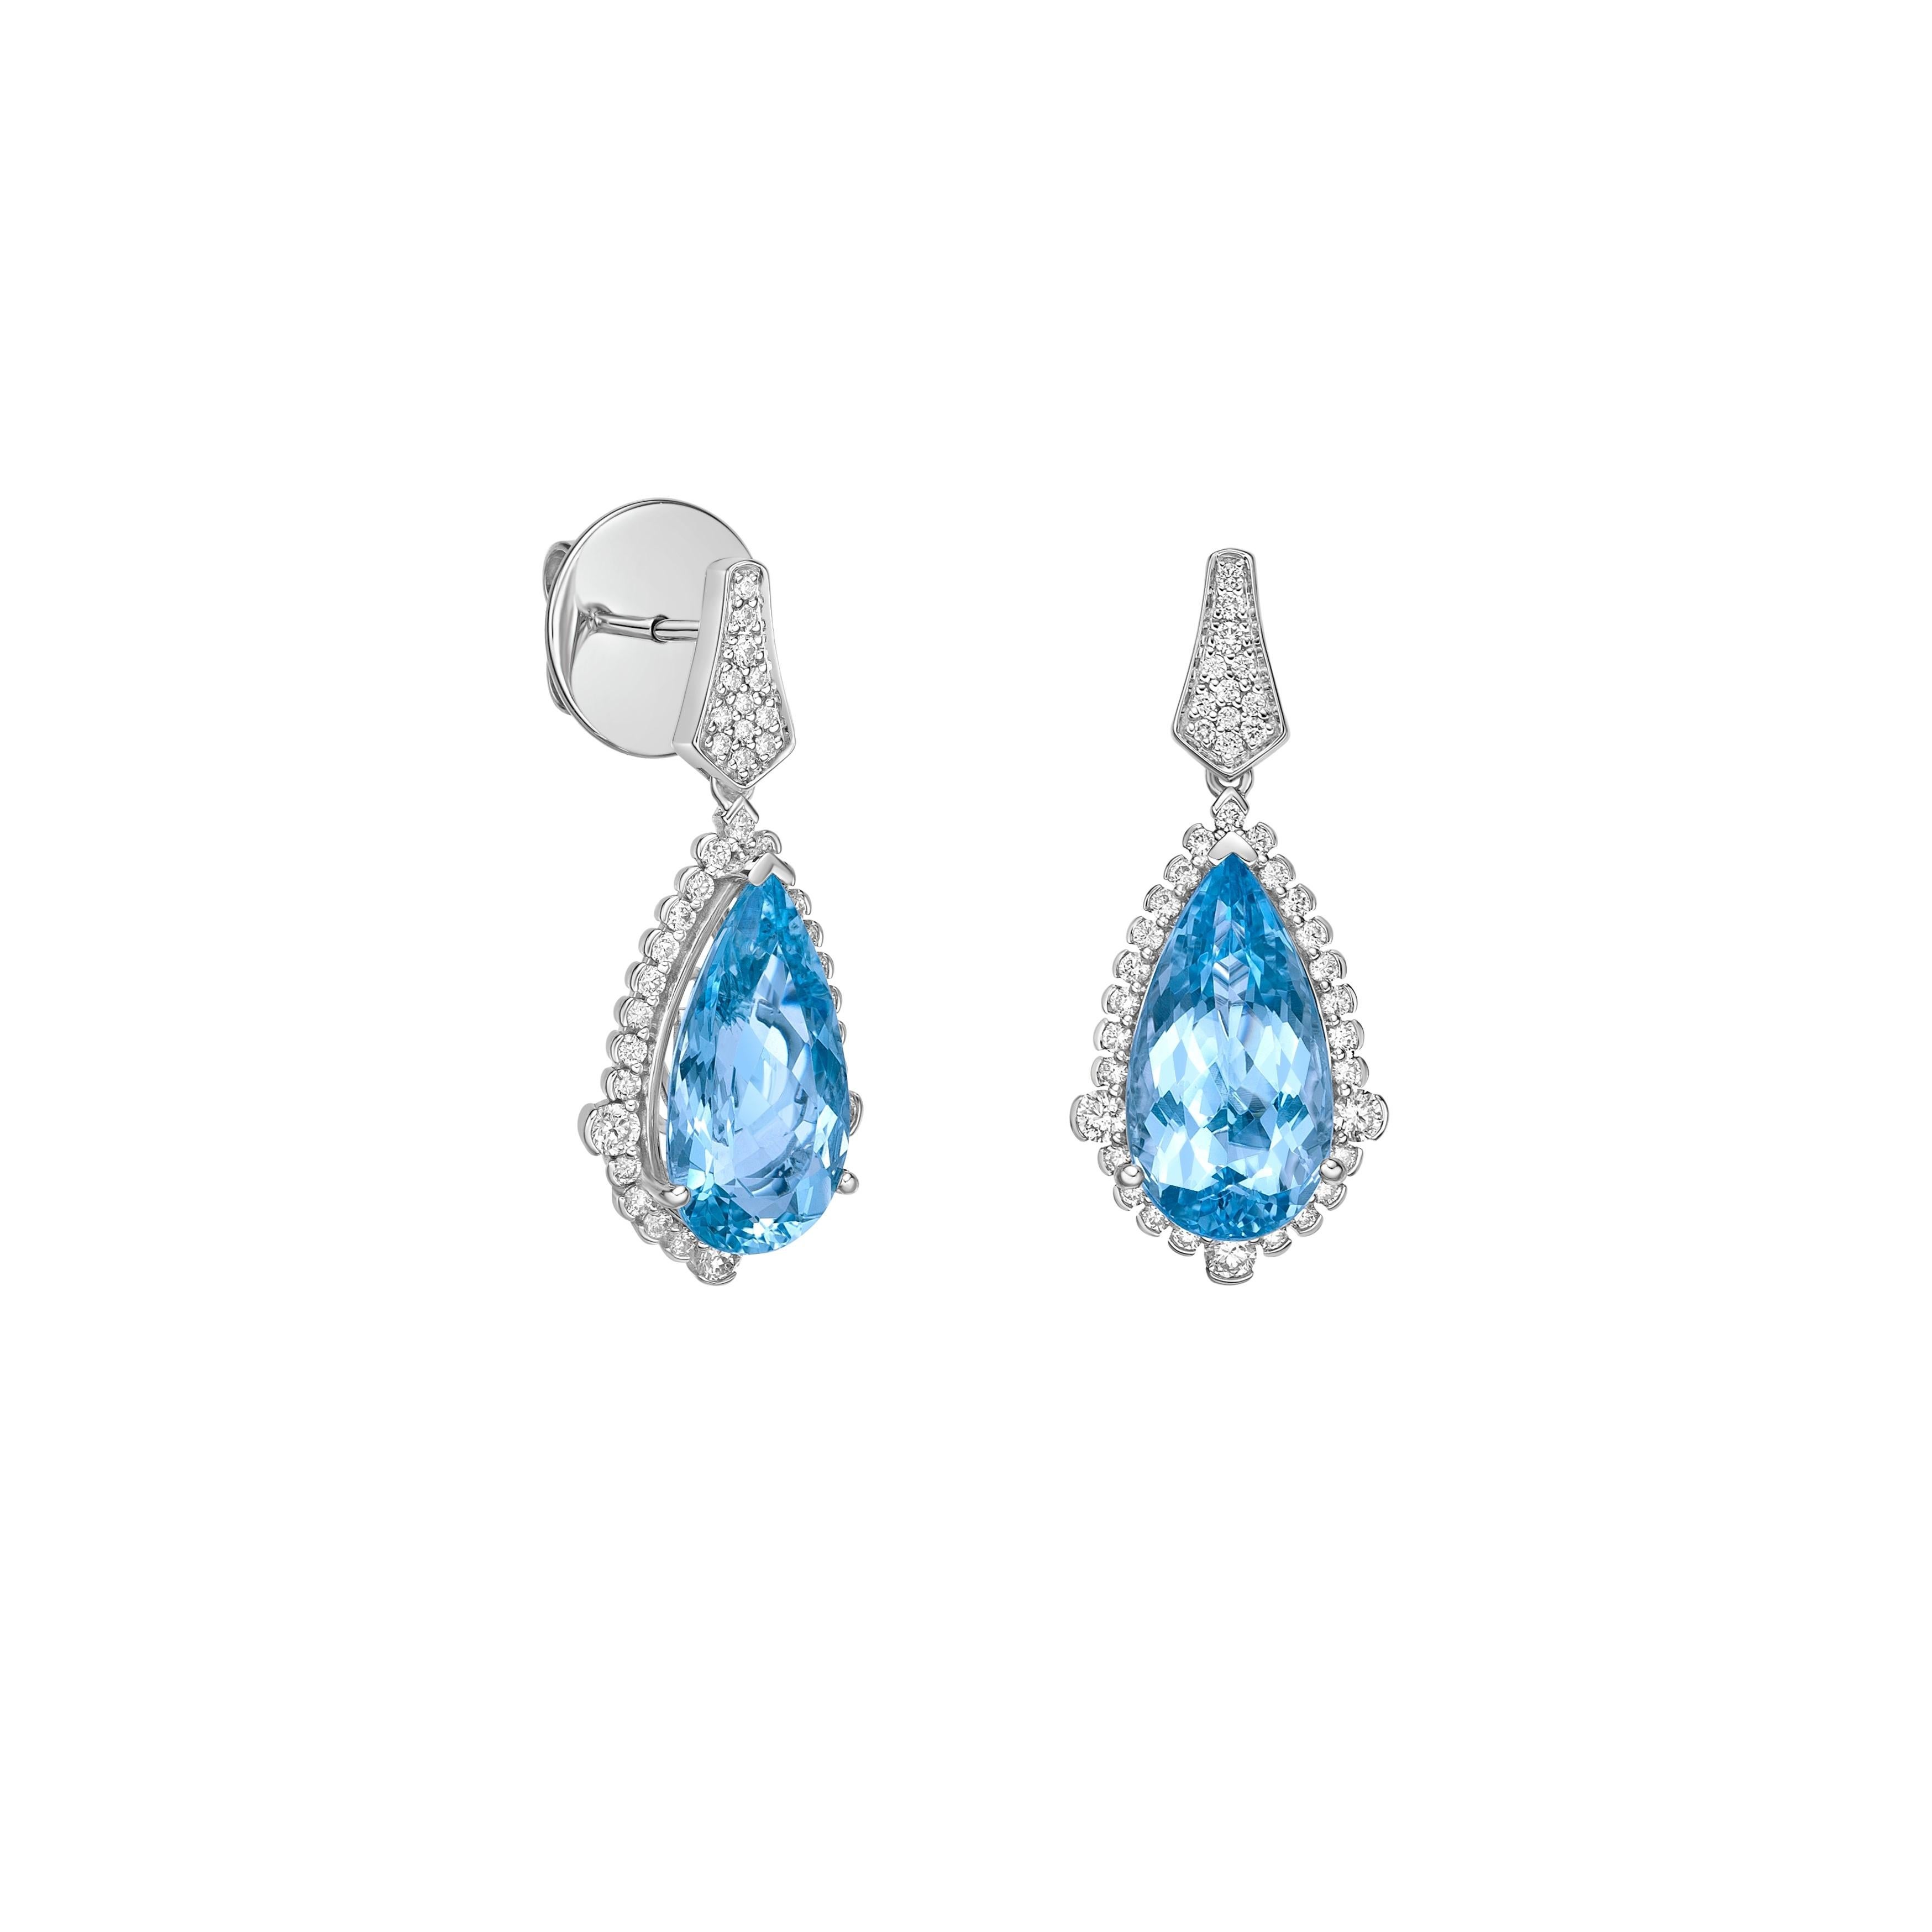 Elevate your look with our stunning Santa Maria aquamarine set, featuring a mesmerizing ice blue hue that radiates elegance. Enhanced with diamonds and crafted in white gold, these drop earrings offer a timeless allure with a touch of modern